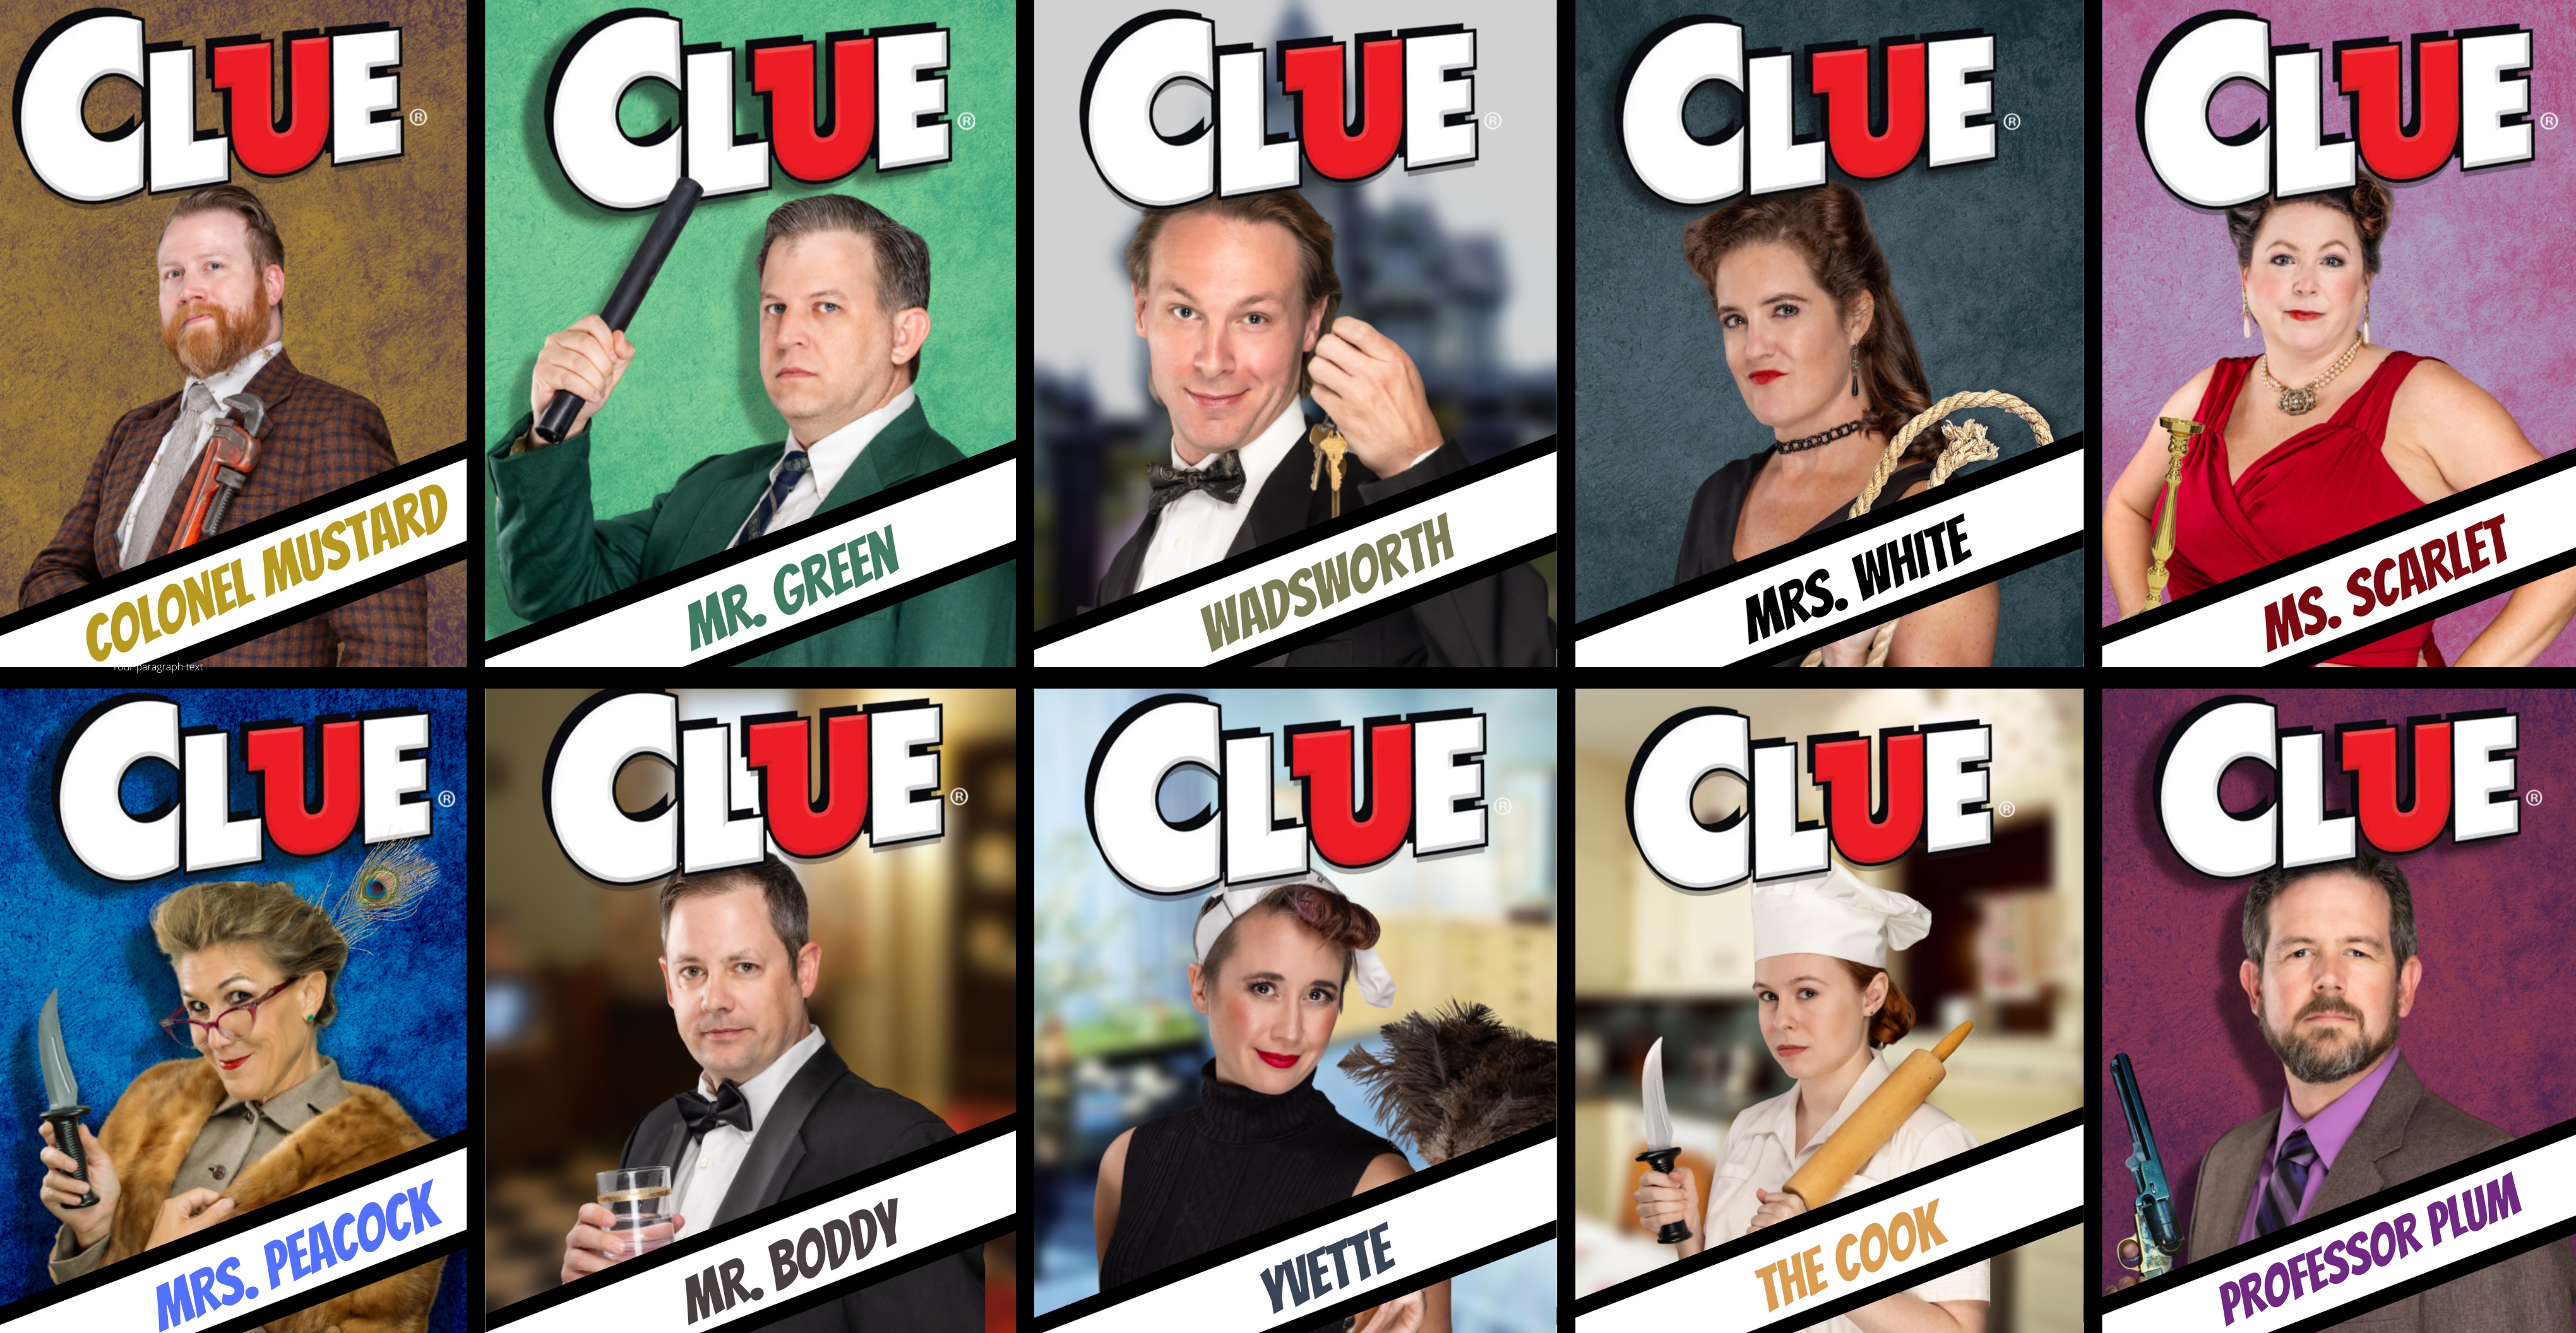 The cast of Cary Players' Clue: On Stage, presented as traditional cards from the board game.